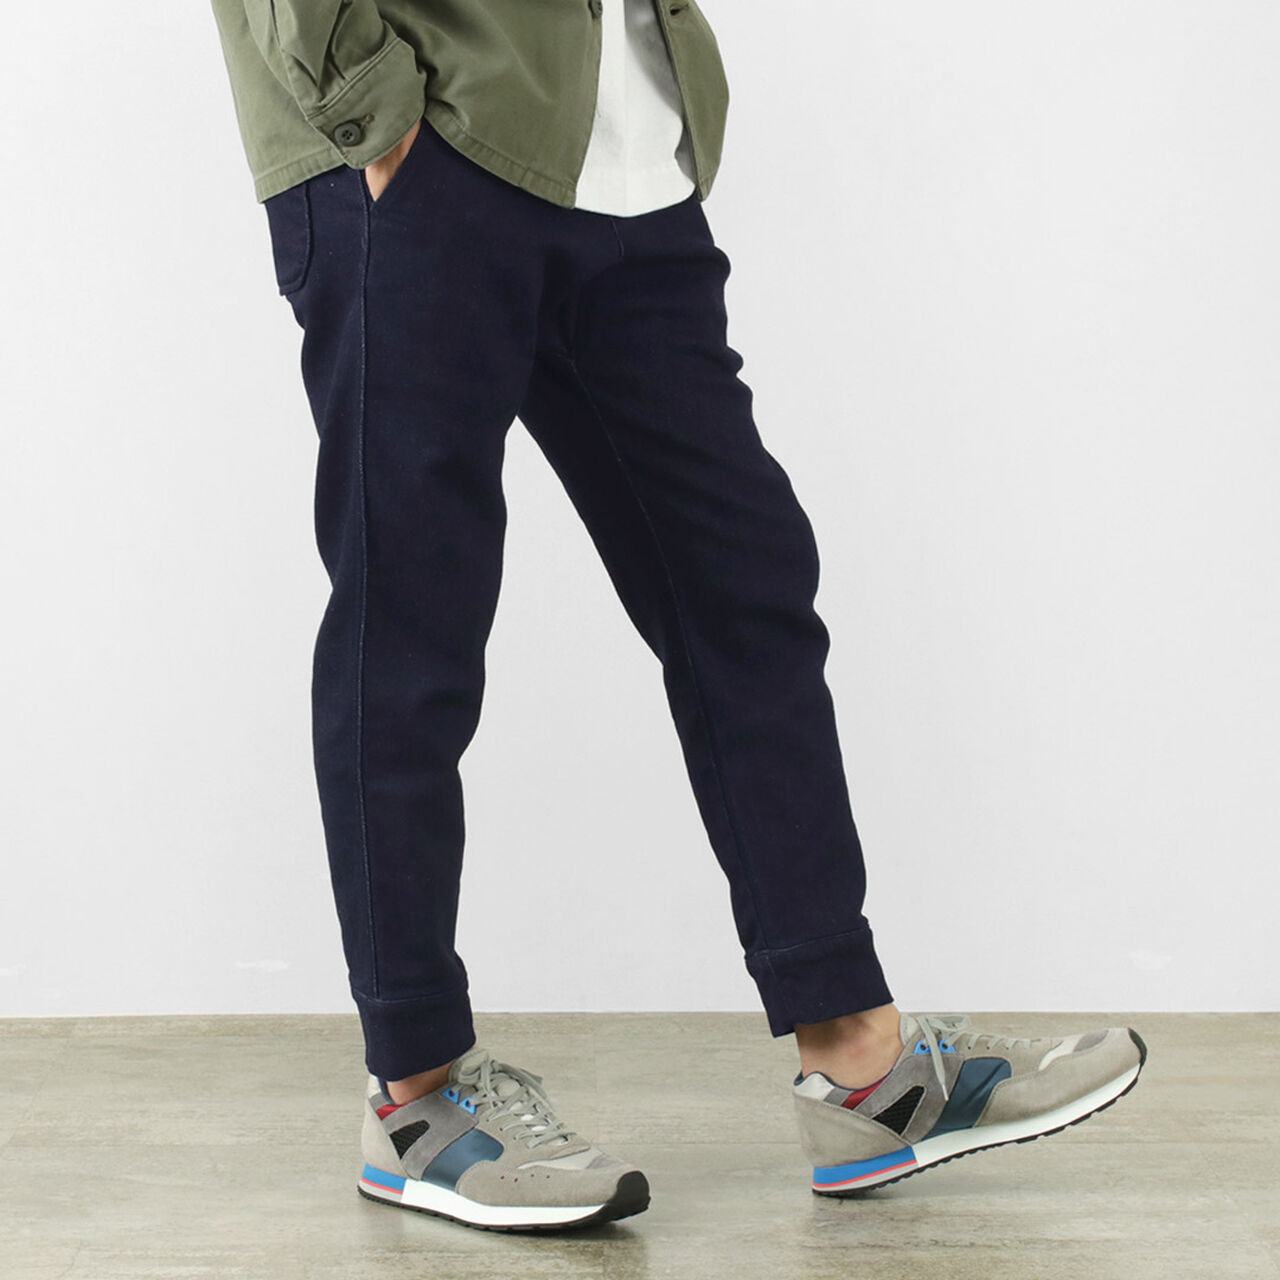 F0520 RELAX SWEAT PANTS,Navy, large image number 0